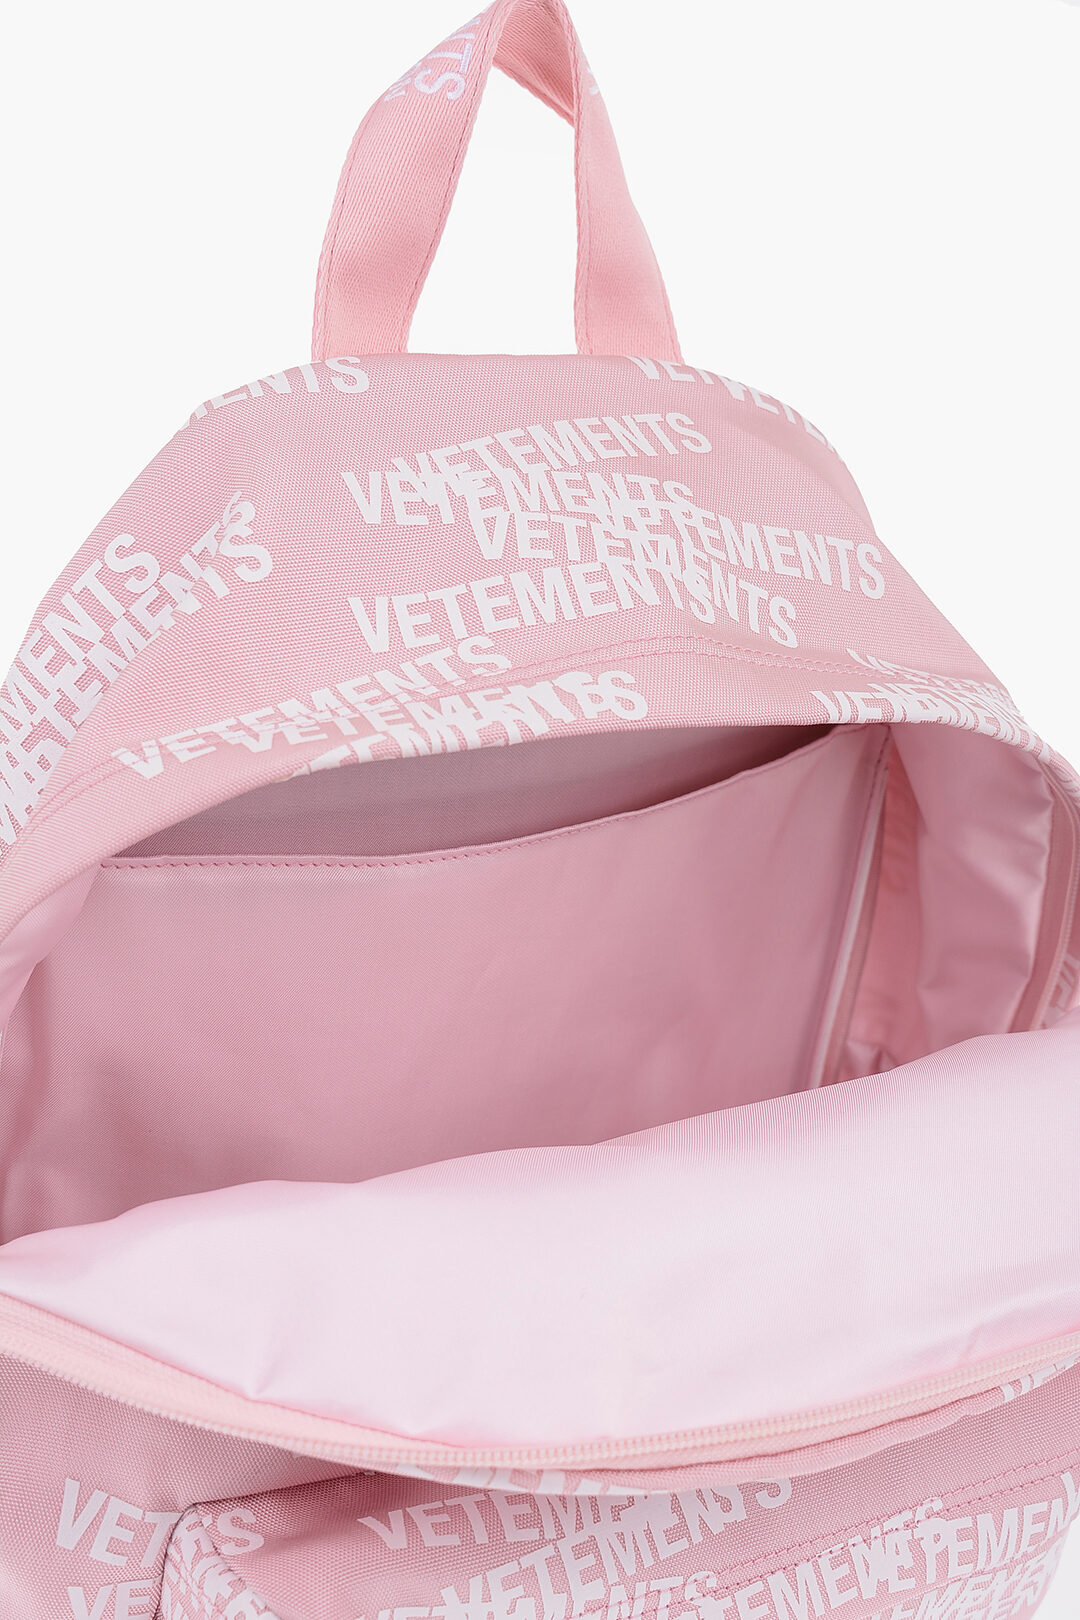 Vetements,VETEMENTS X Eastpak embroidered canvas backpack - WEAR